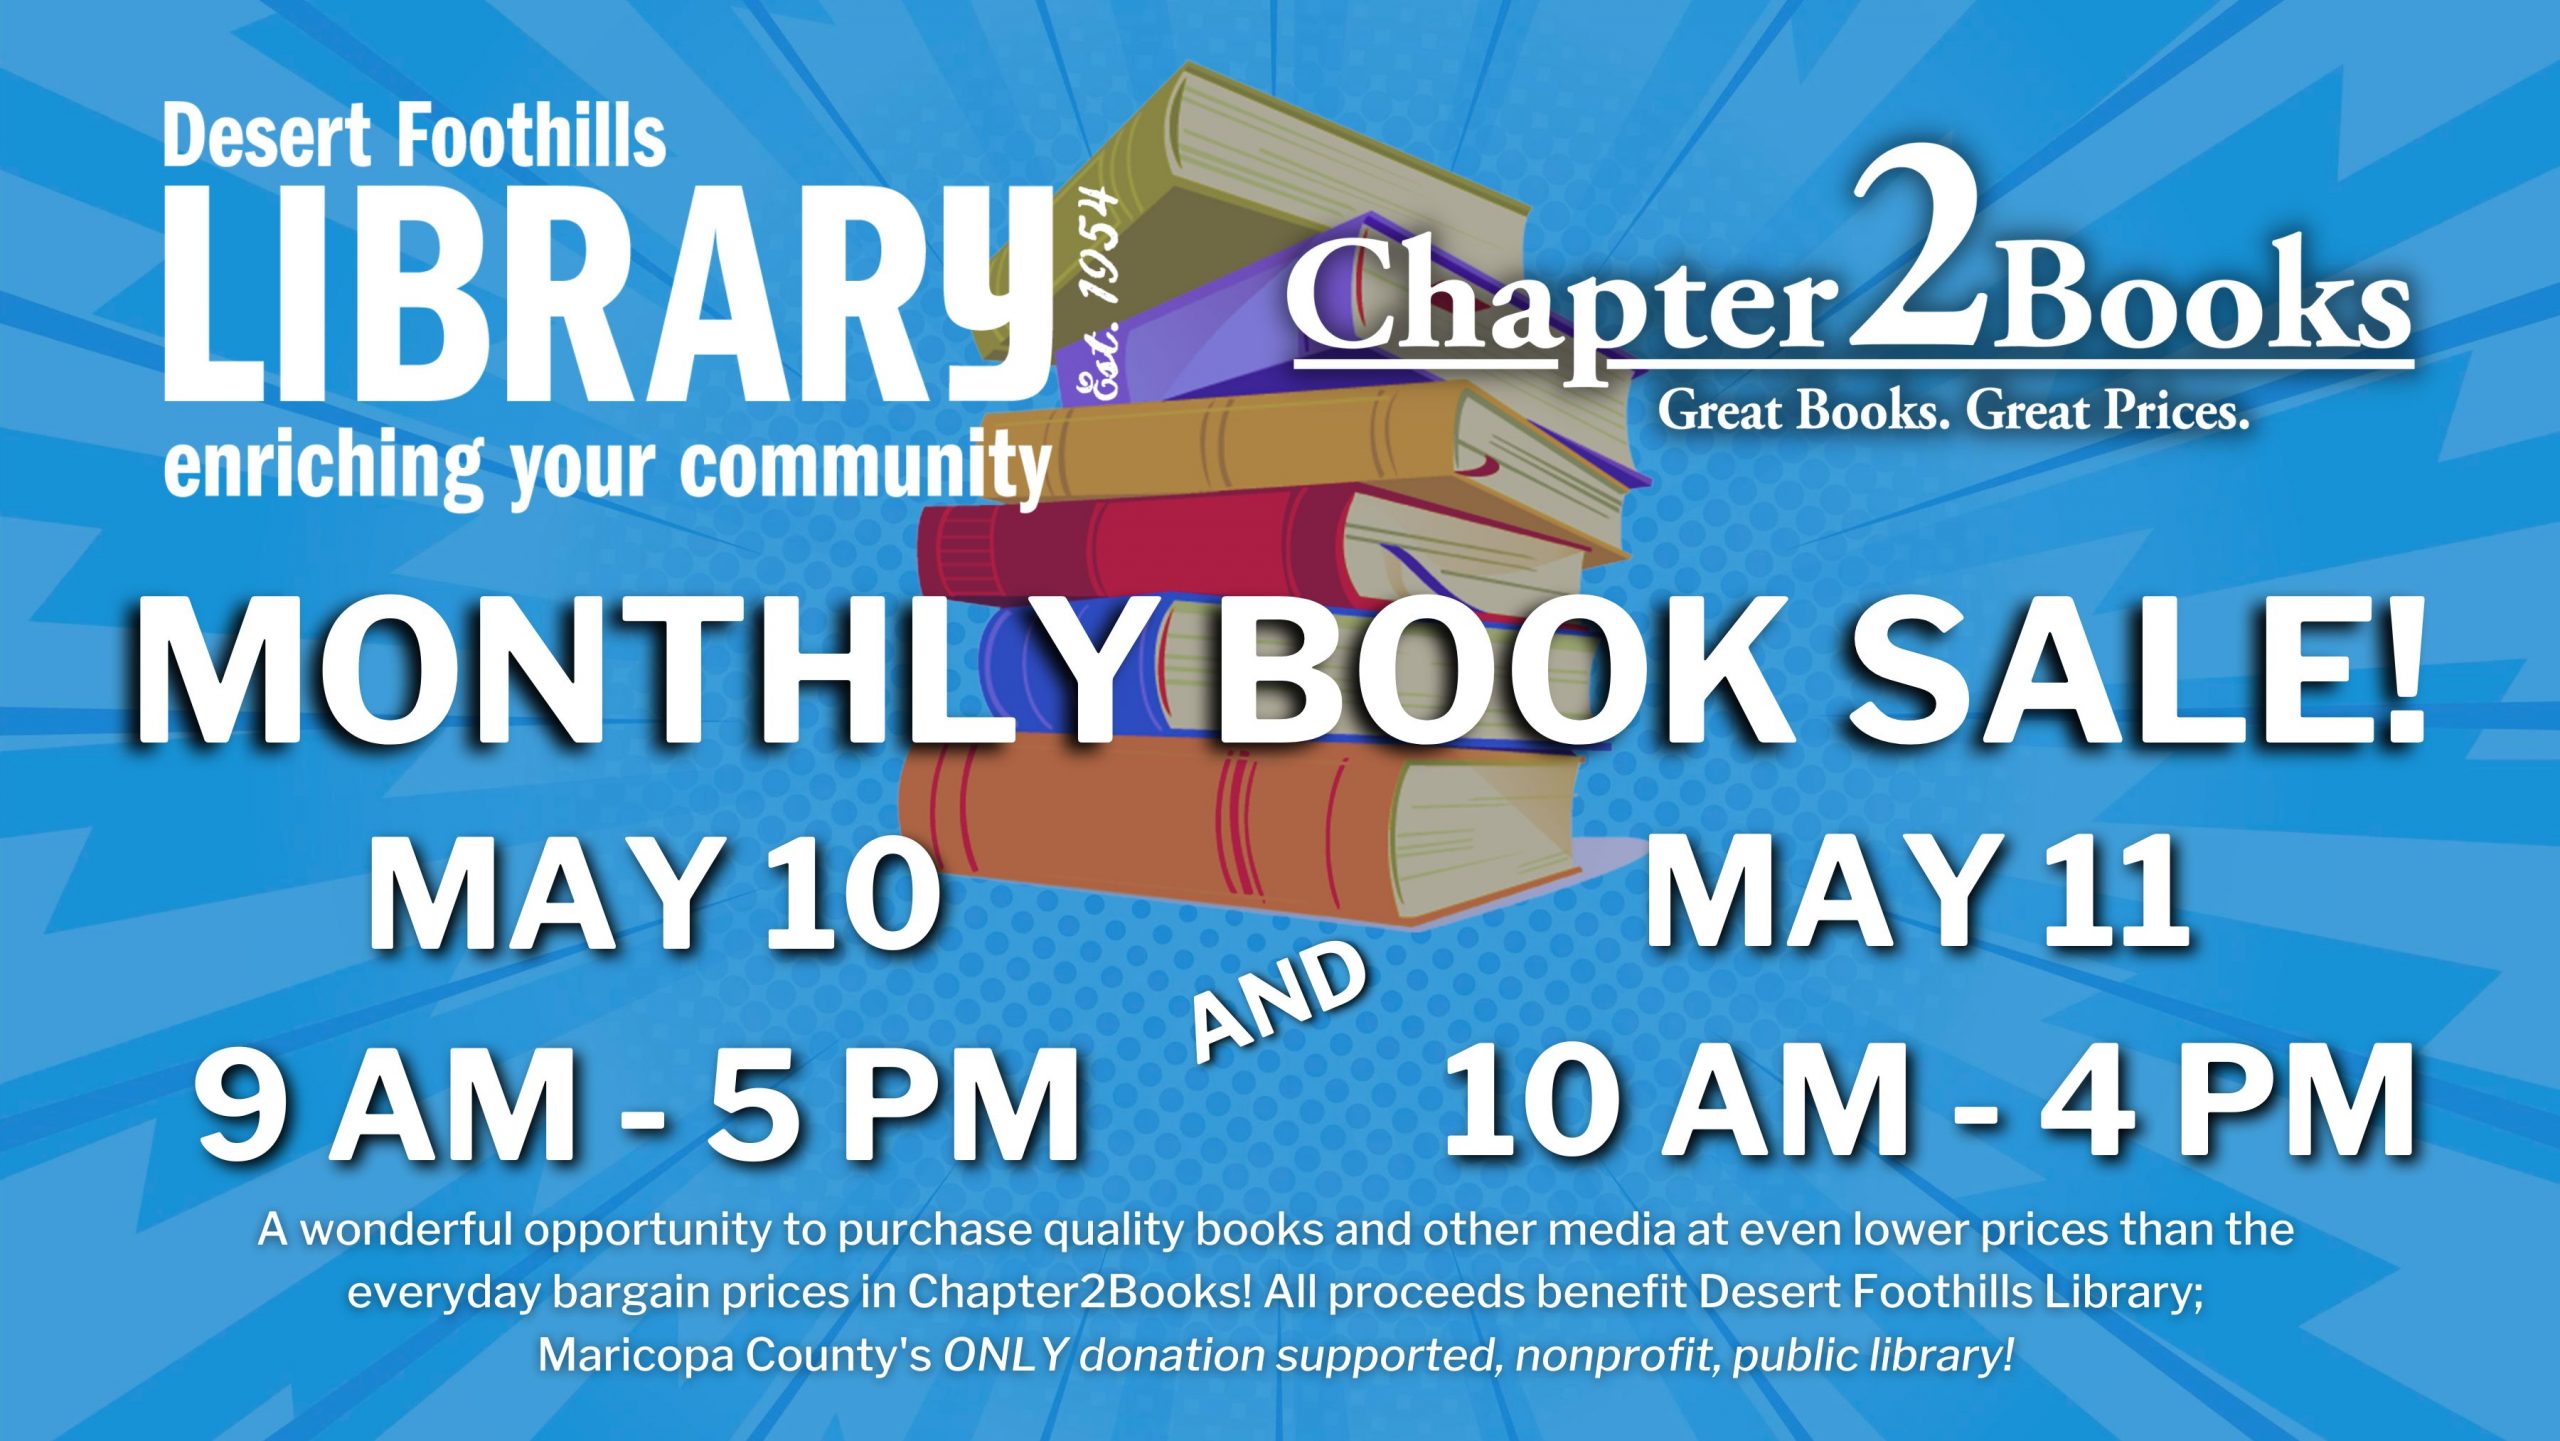 Monthly book sale at the desert foothills library